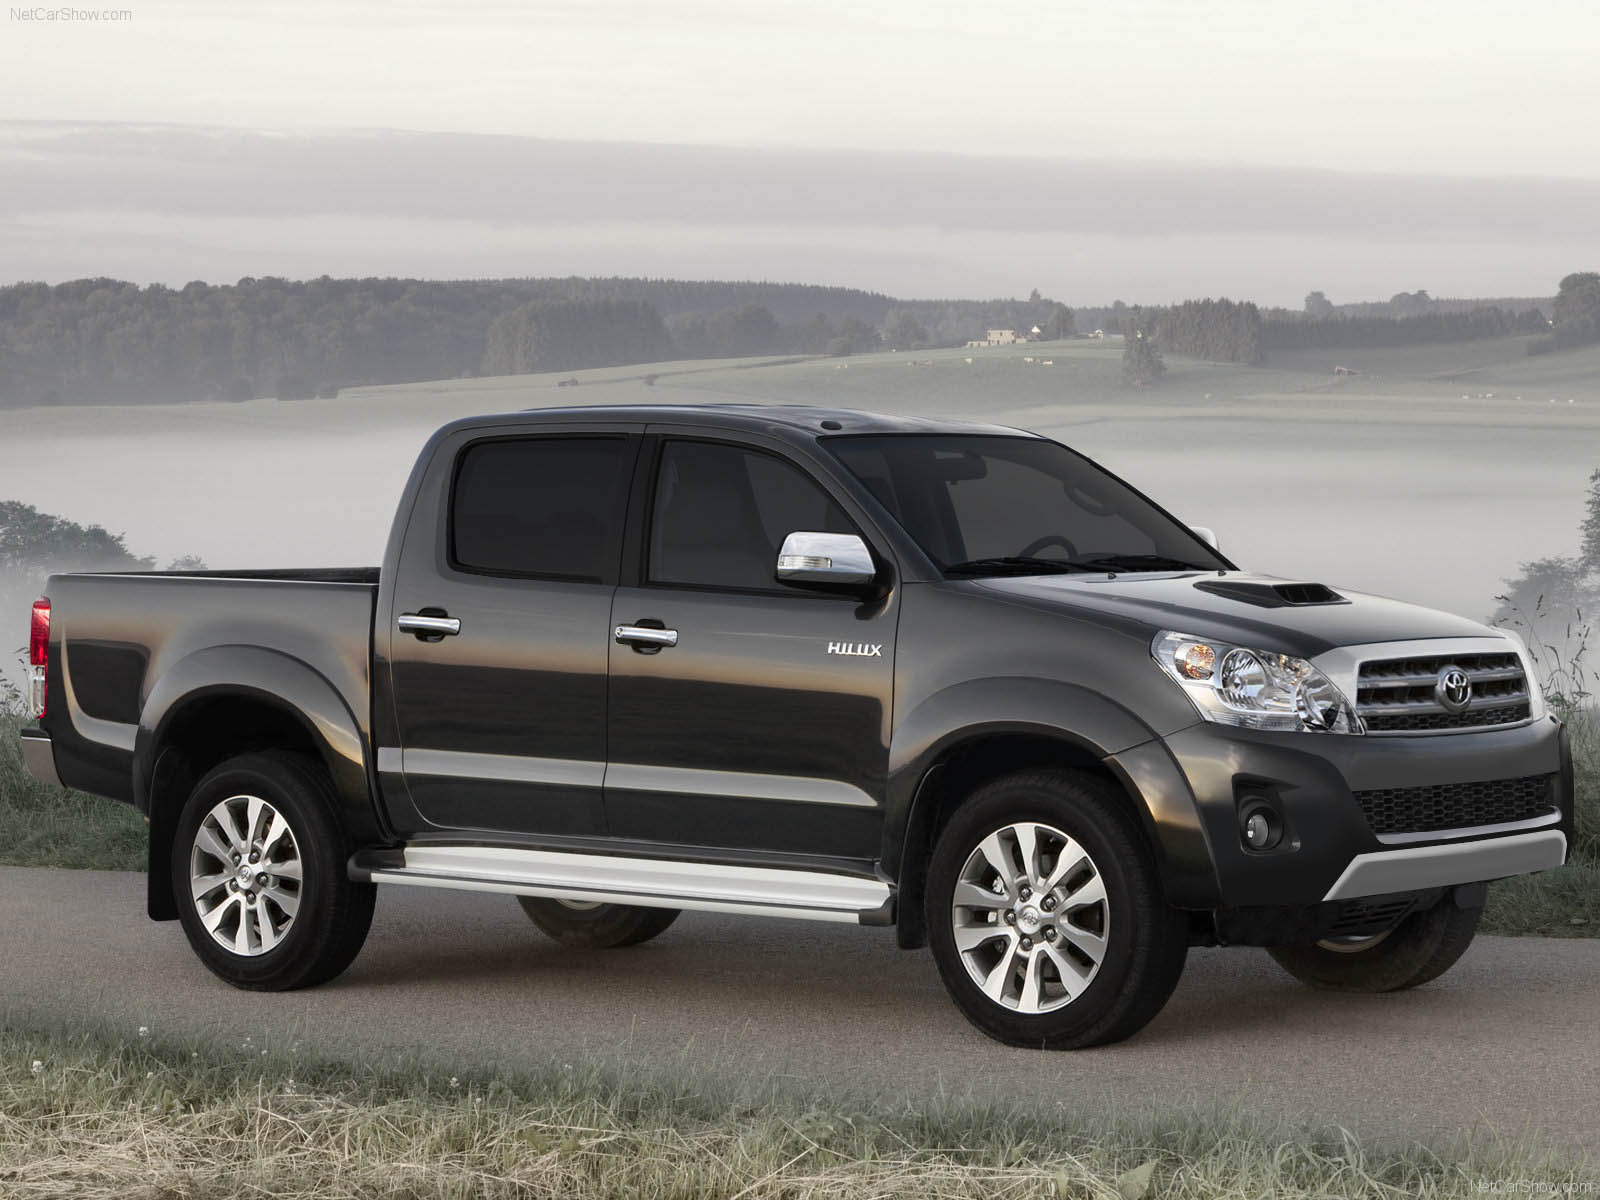 Toyota Hilux 2012 Pickup Truck Review with Wallpapers Auto Car 1600x1200